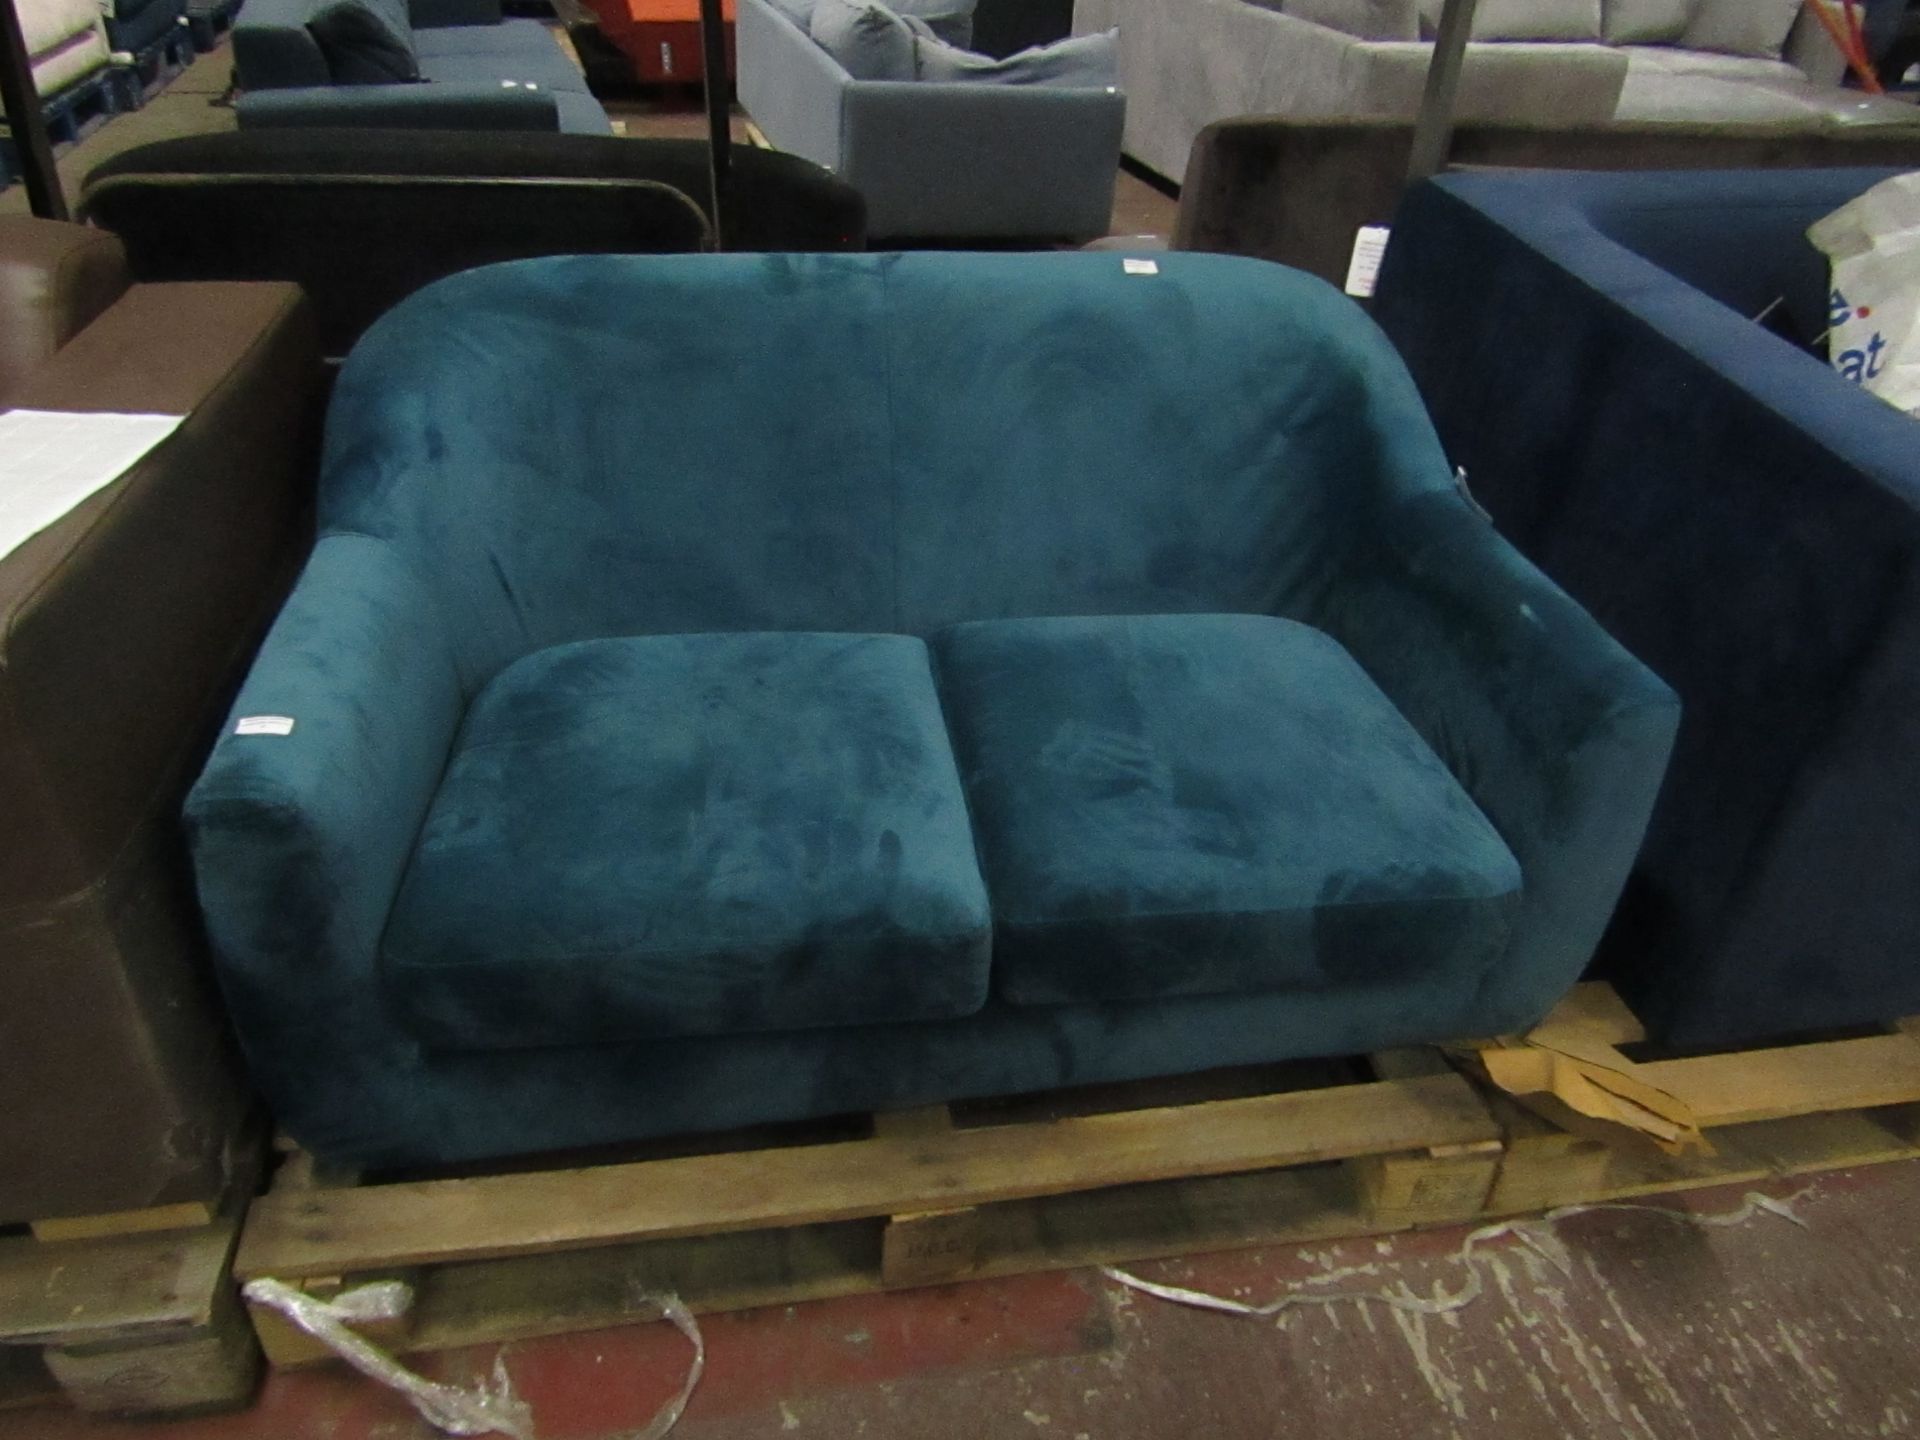 | 1X | MADE.COM TUBBY 2 SEATER SOFA, TEAL VELVET | HAS MARKS ON THE MATERIAL SO WILL NEED A